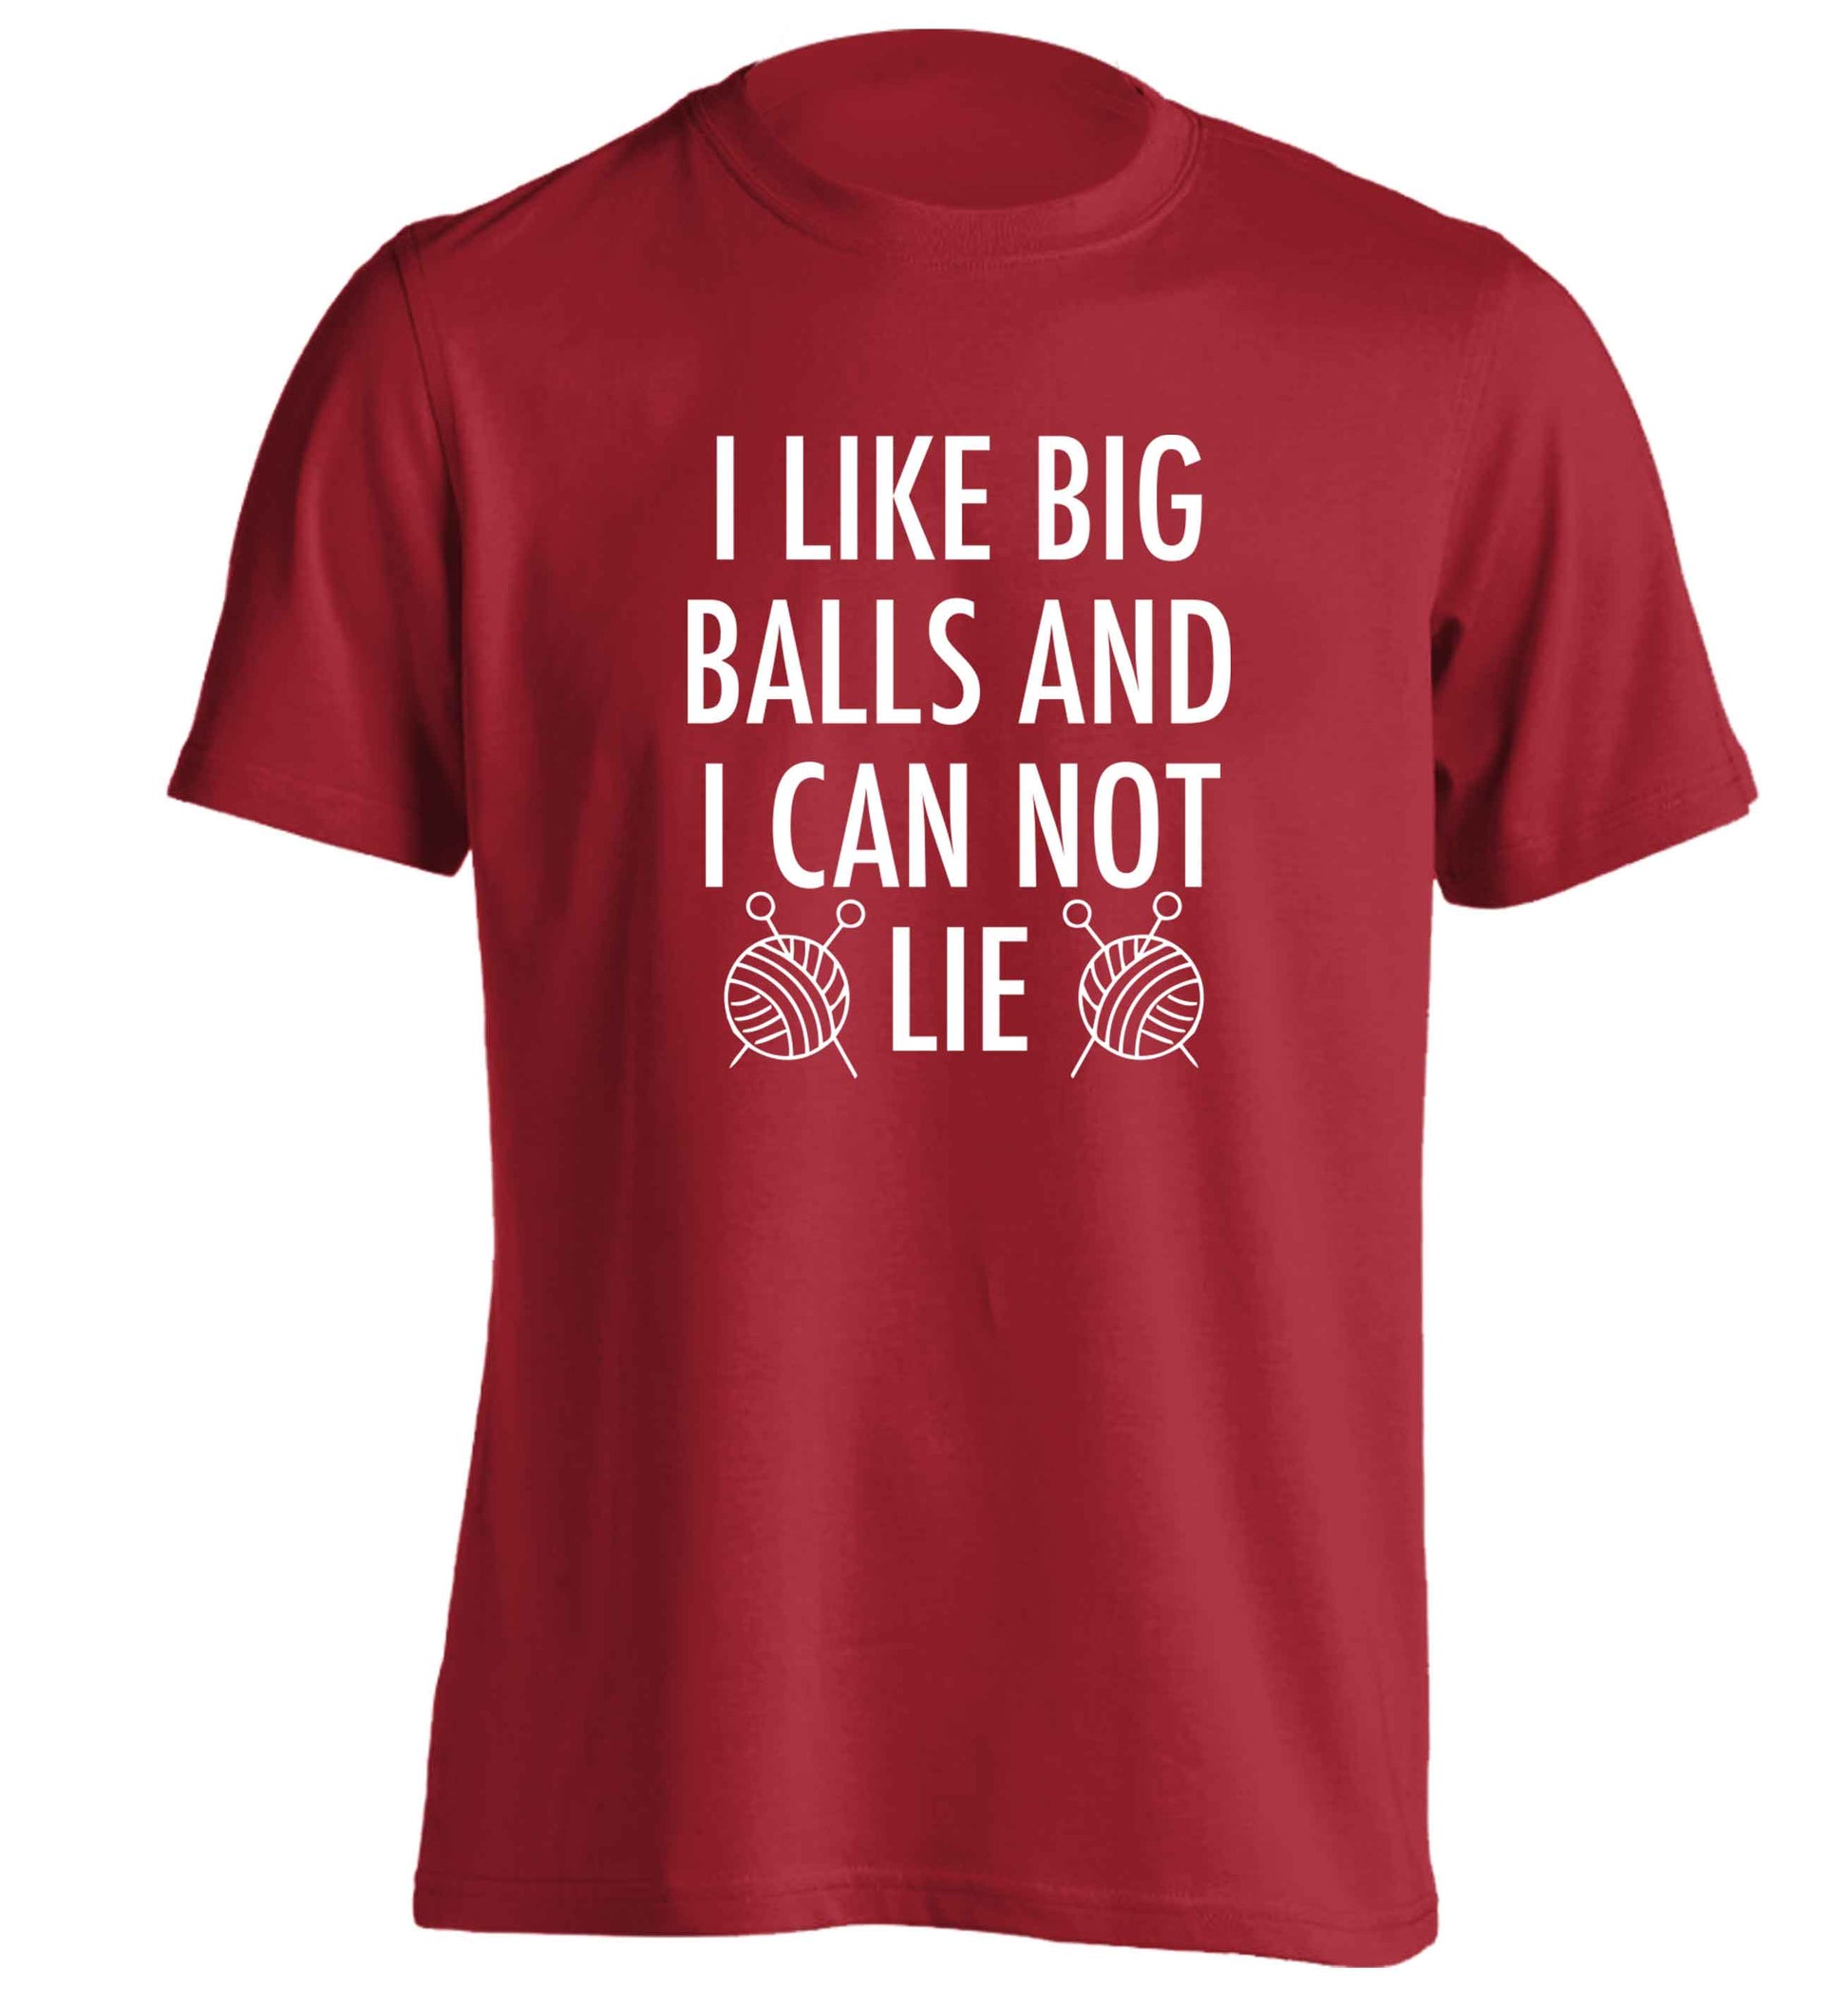 I like big balls and I can not lie adults unisex red Tshirt 2XL